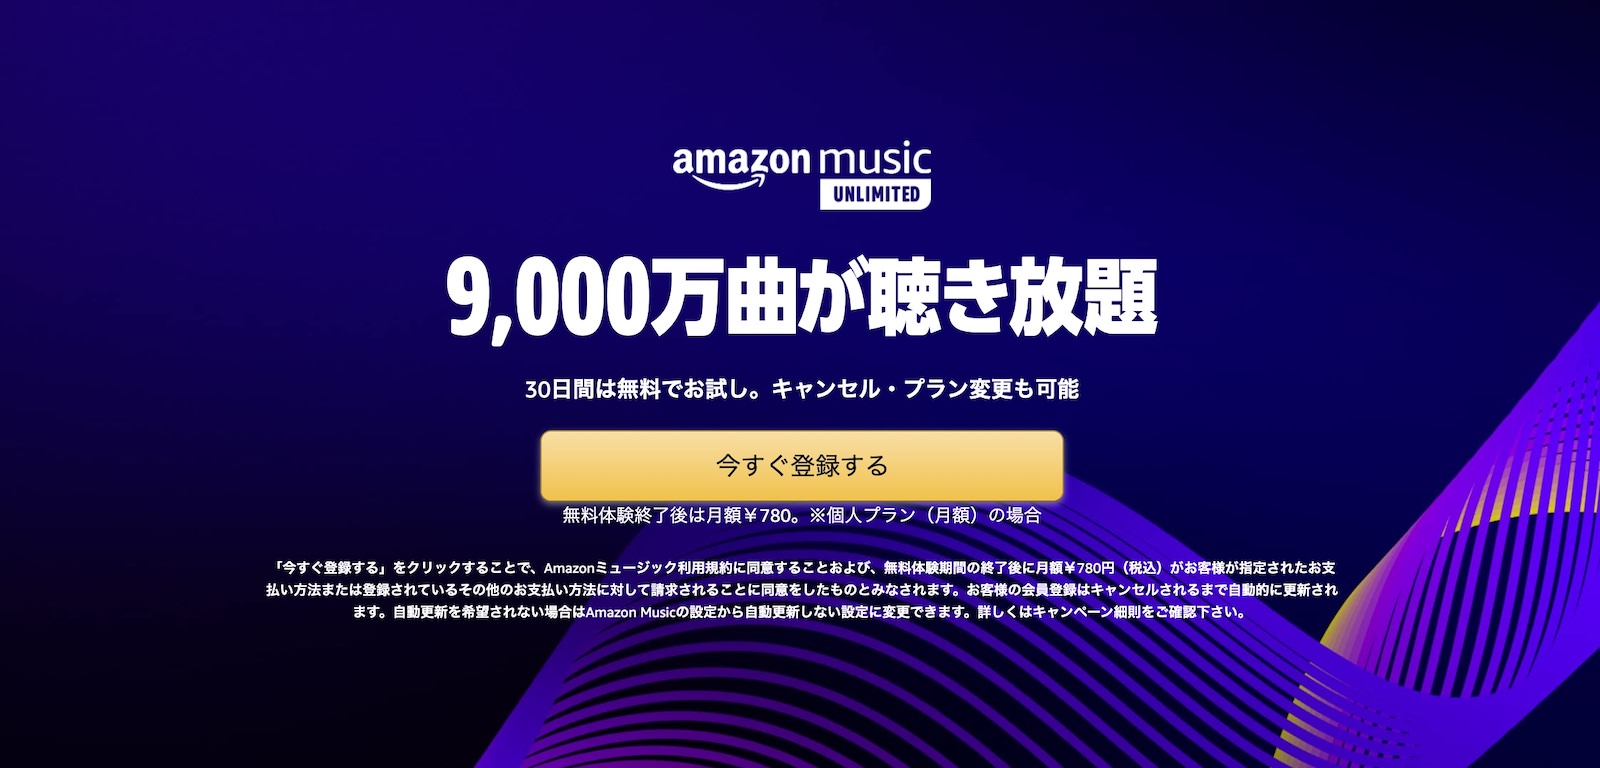 Amazon Music Unlimited 90M songs